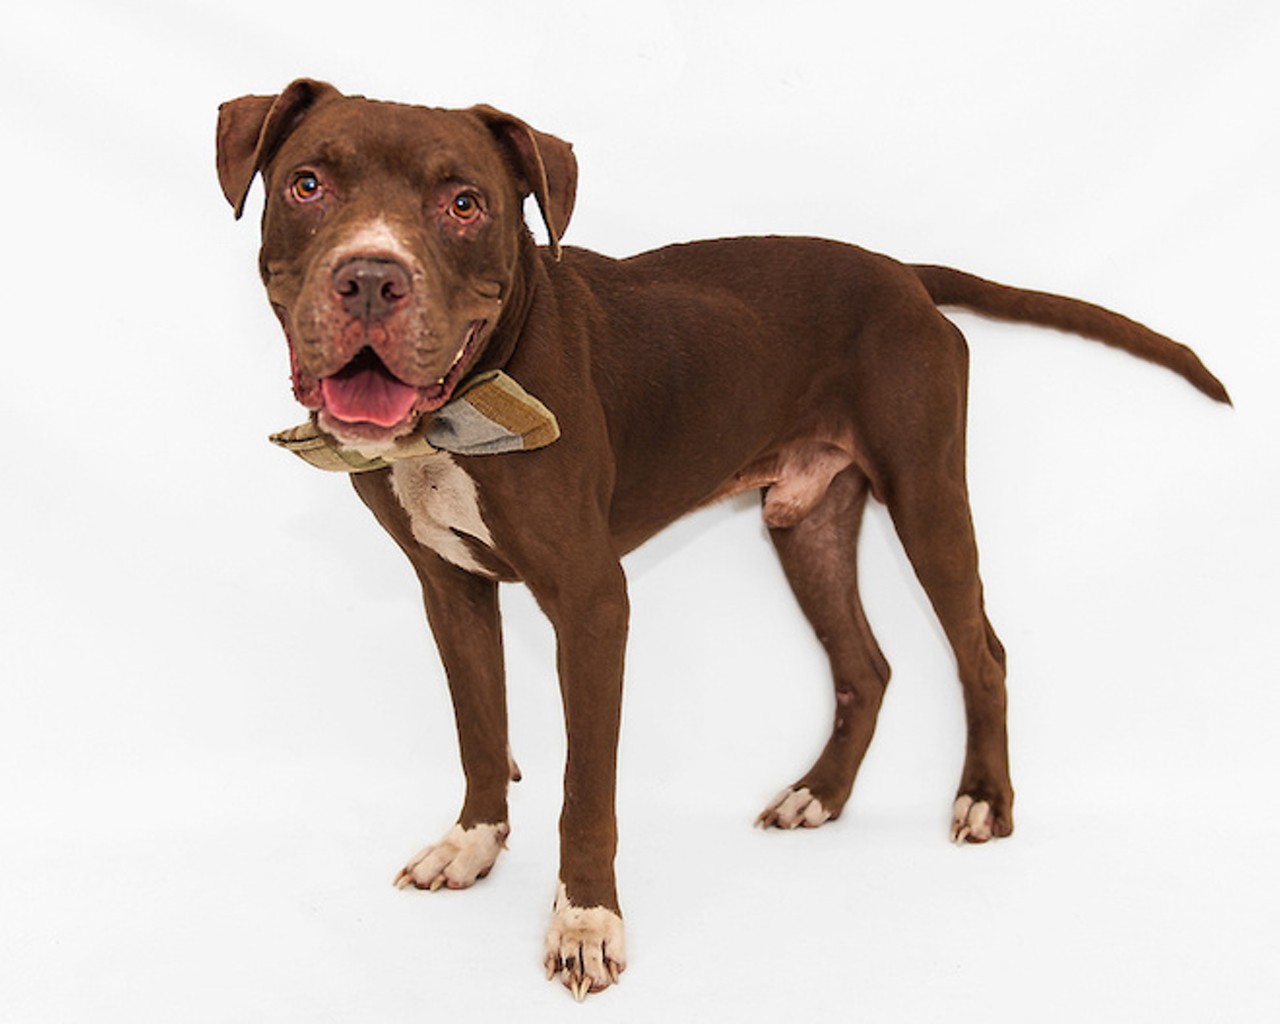 The shelter is full! Here are 50 awesome dogs and cats who need homes now.